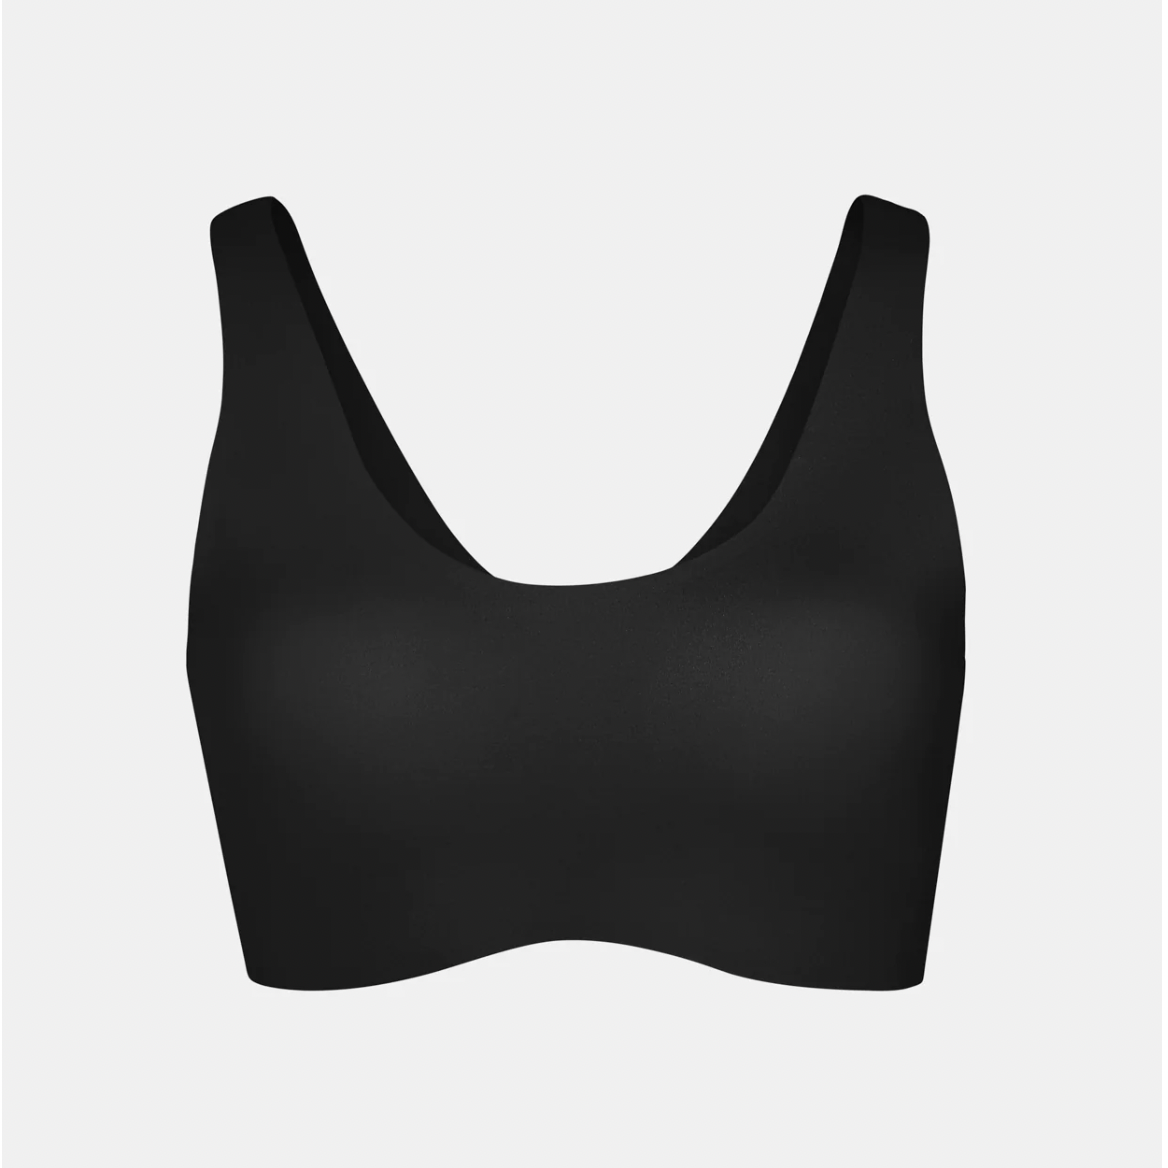 World's Most Breathable & Comfortable Nontoxic Bra by Jocelyn